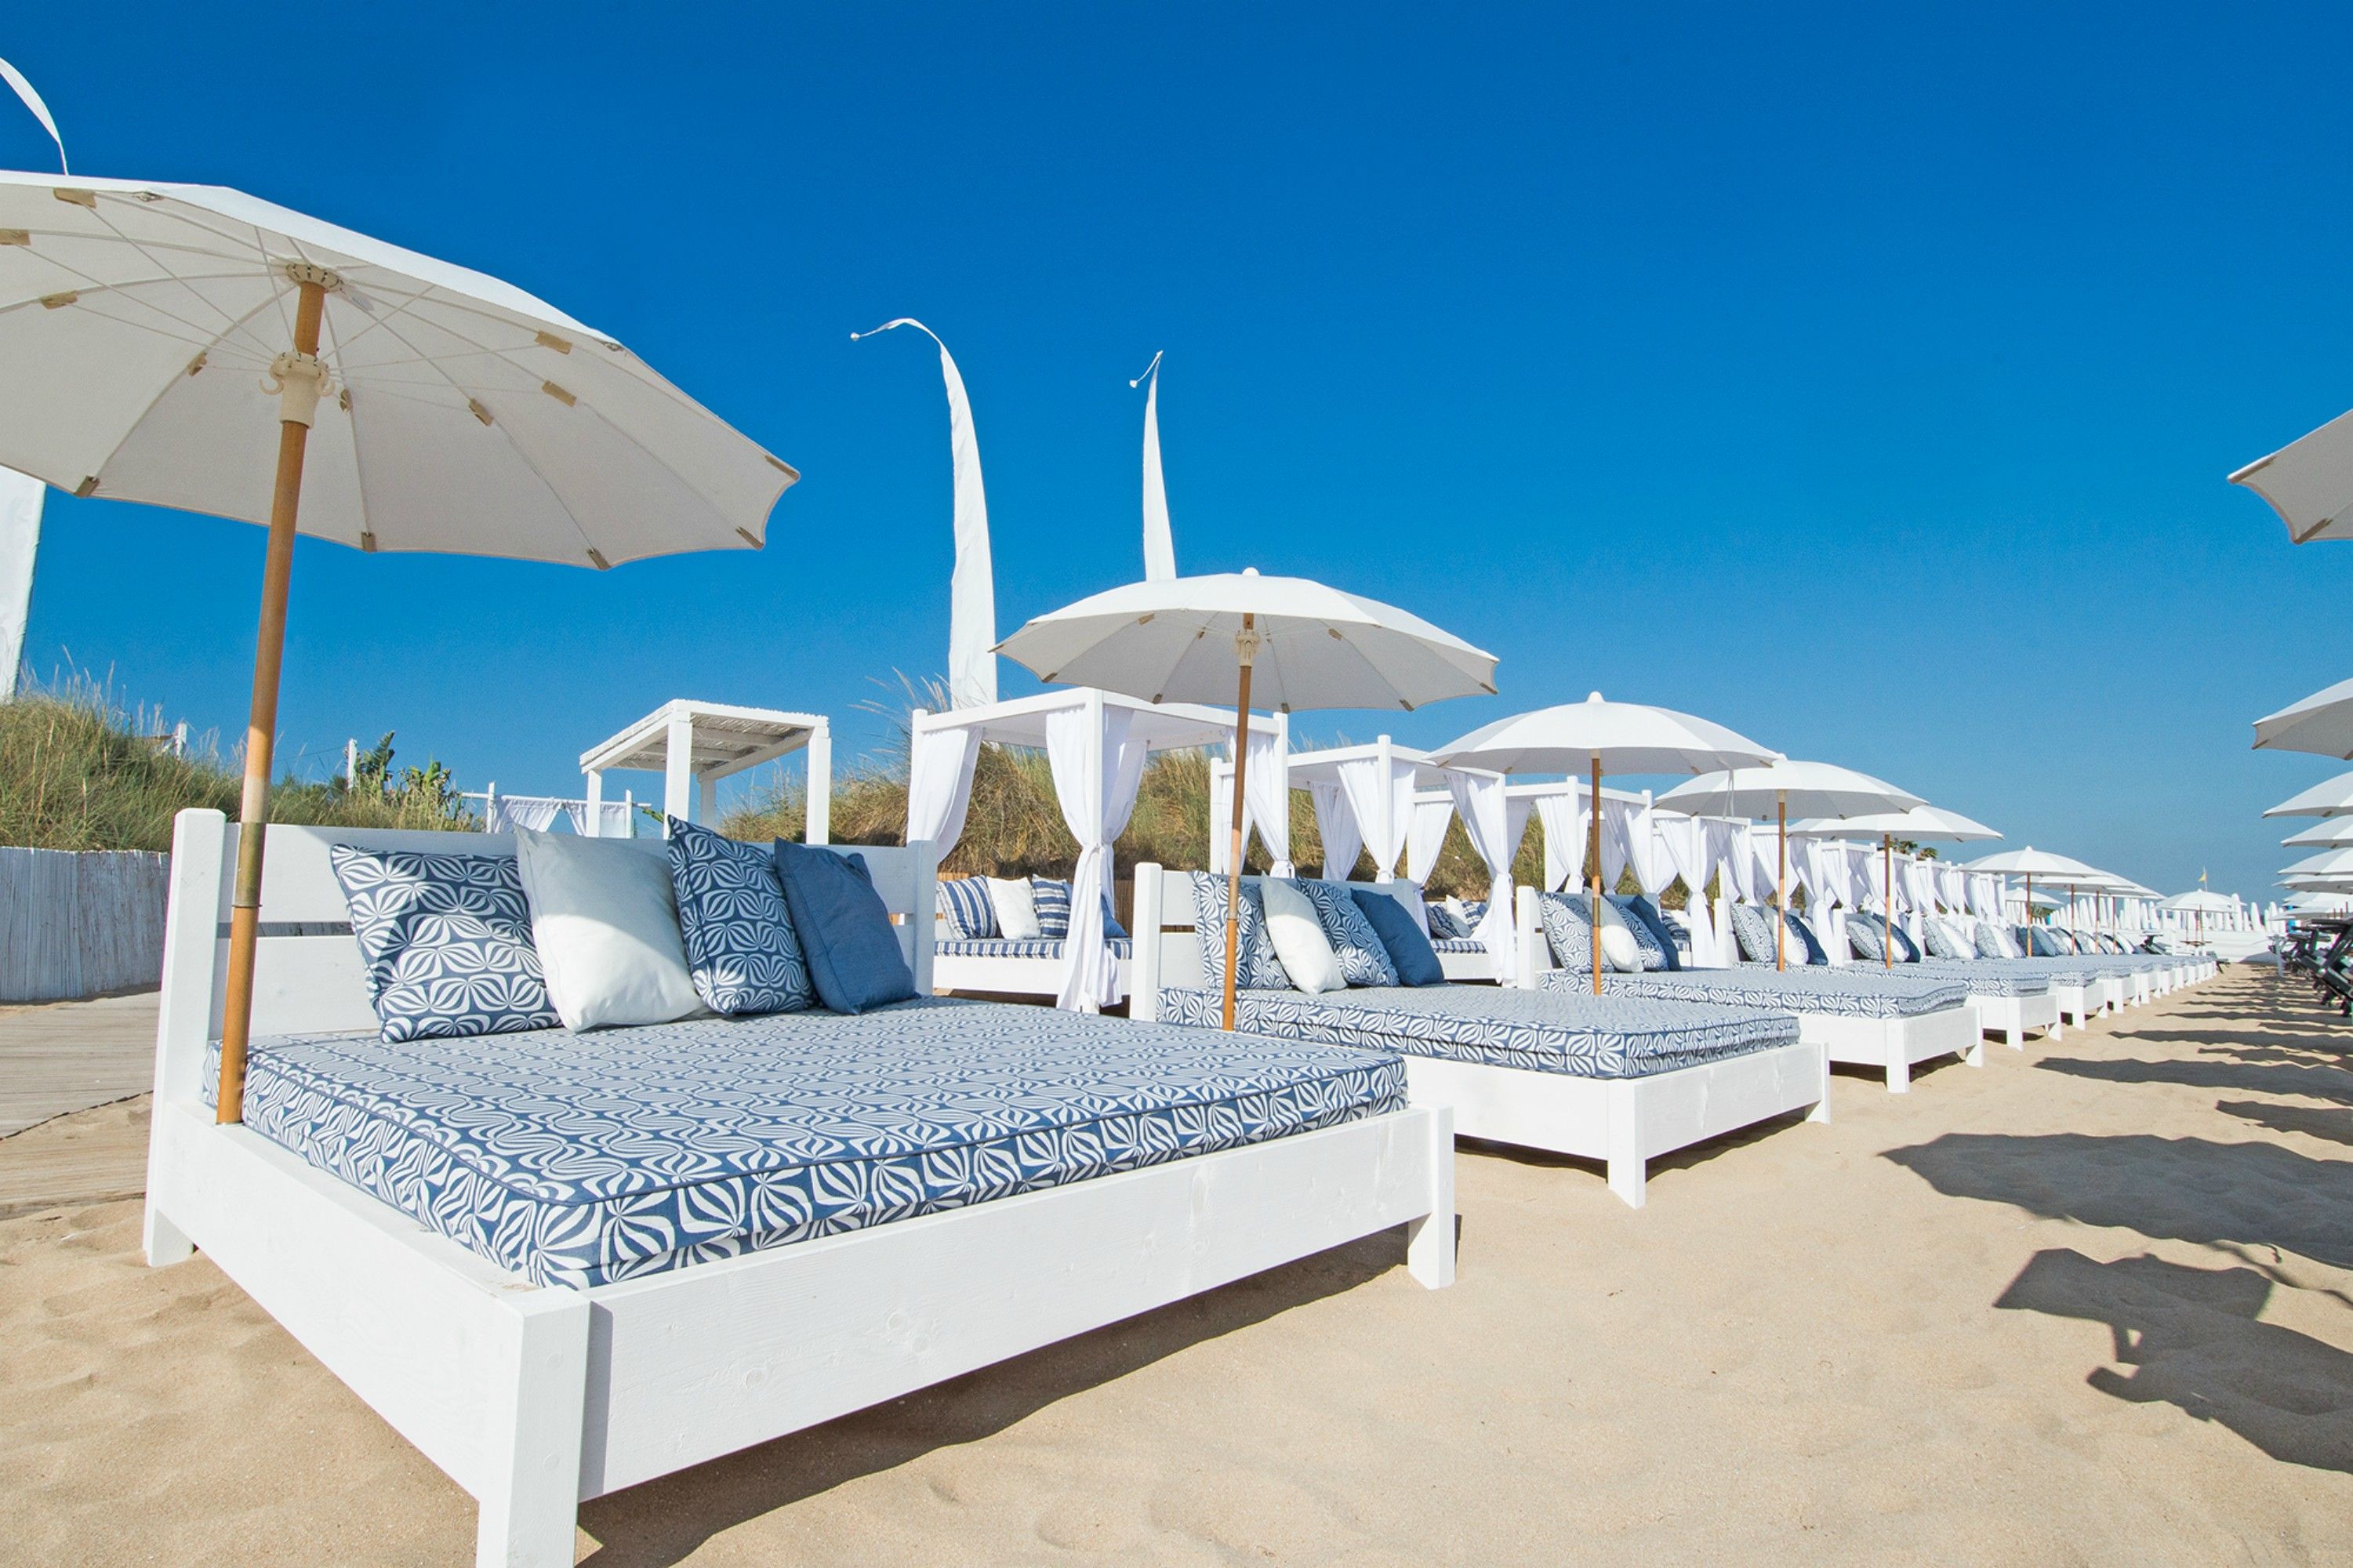 Fashion meets paradise: The Ultimate beach clubs to experience luxury and  style this summer